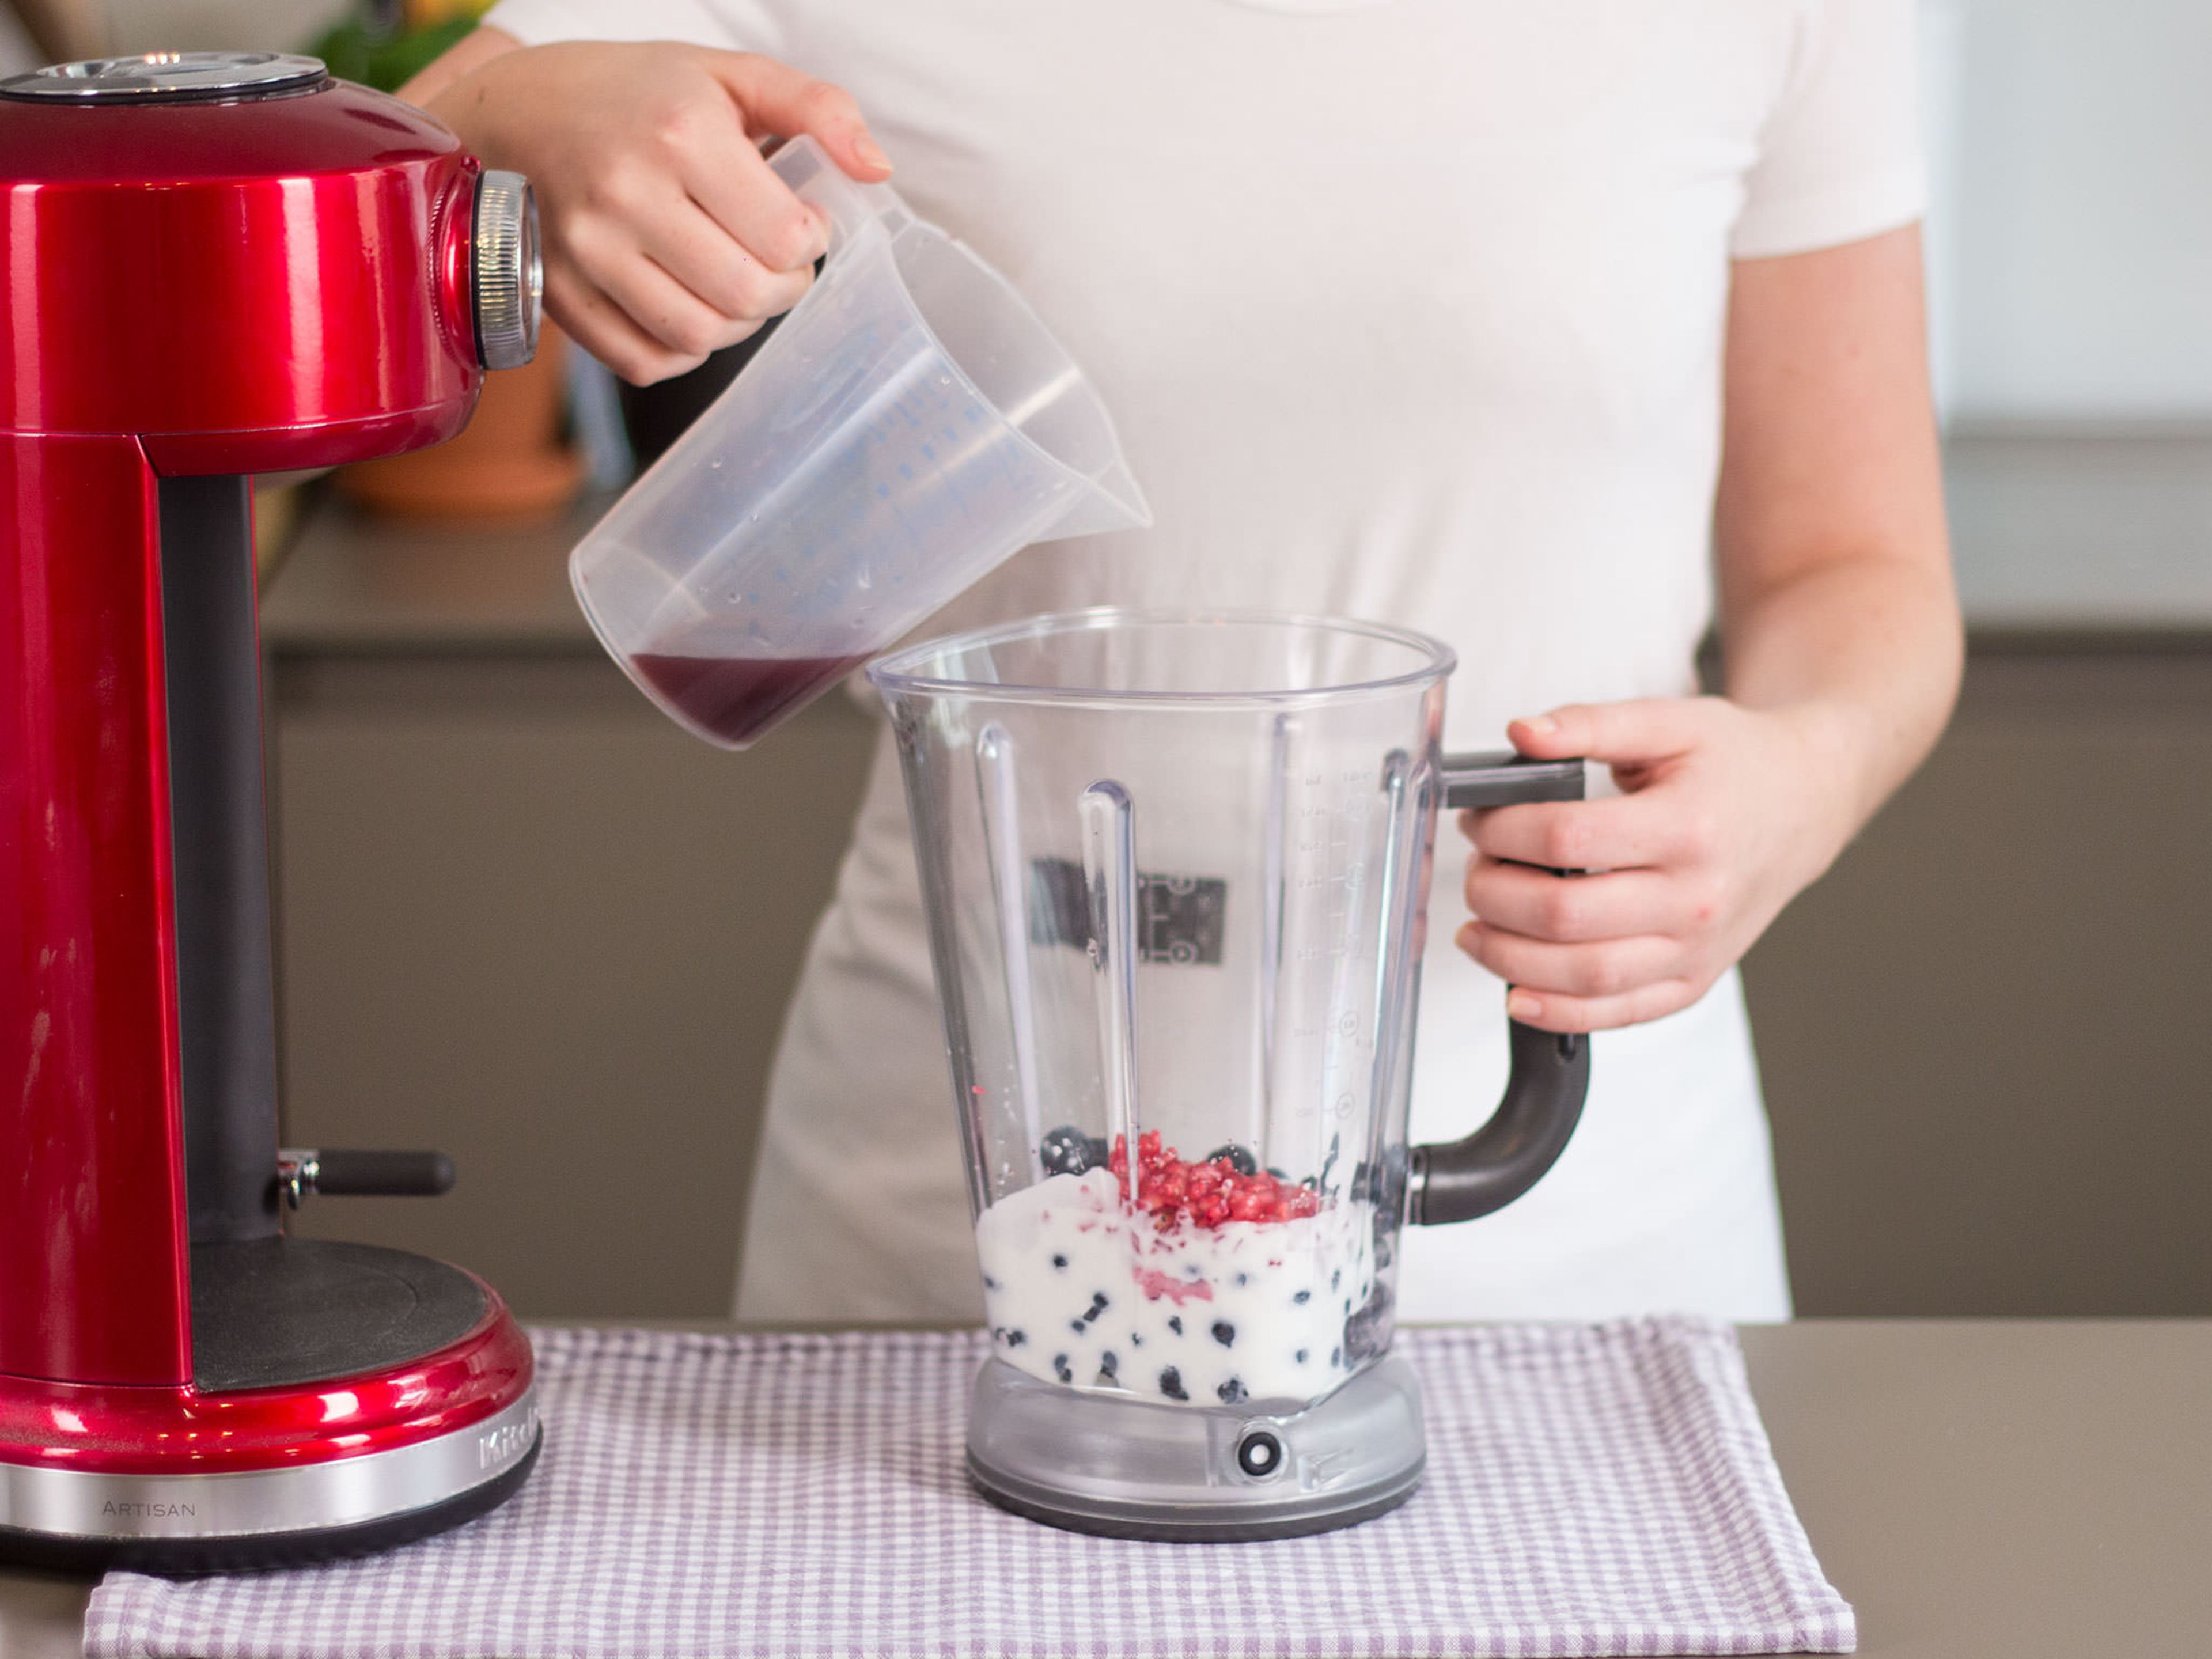 Add pomegranate seeds, blueberries, yogurt, and pomegranate juice to blender. Blend on high speed for approx. 1 – 2 min. until smooth. Enjoy straightaway and garnish with pomegranate seeds.